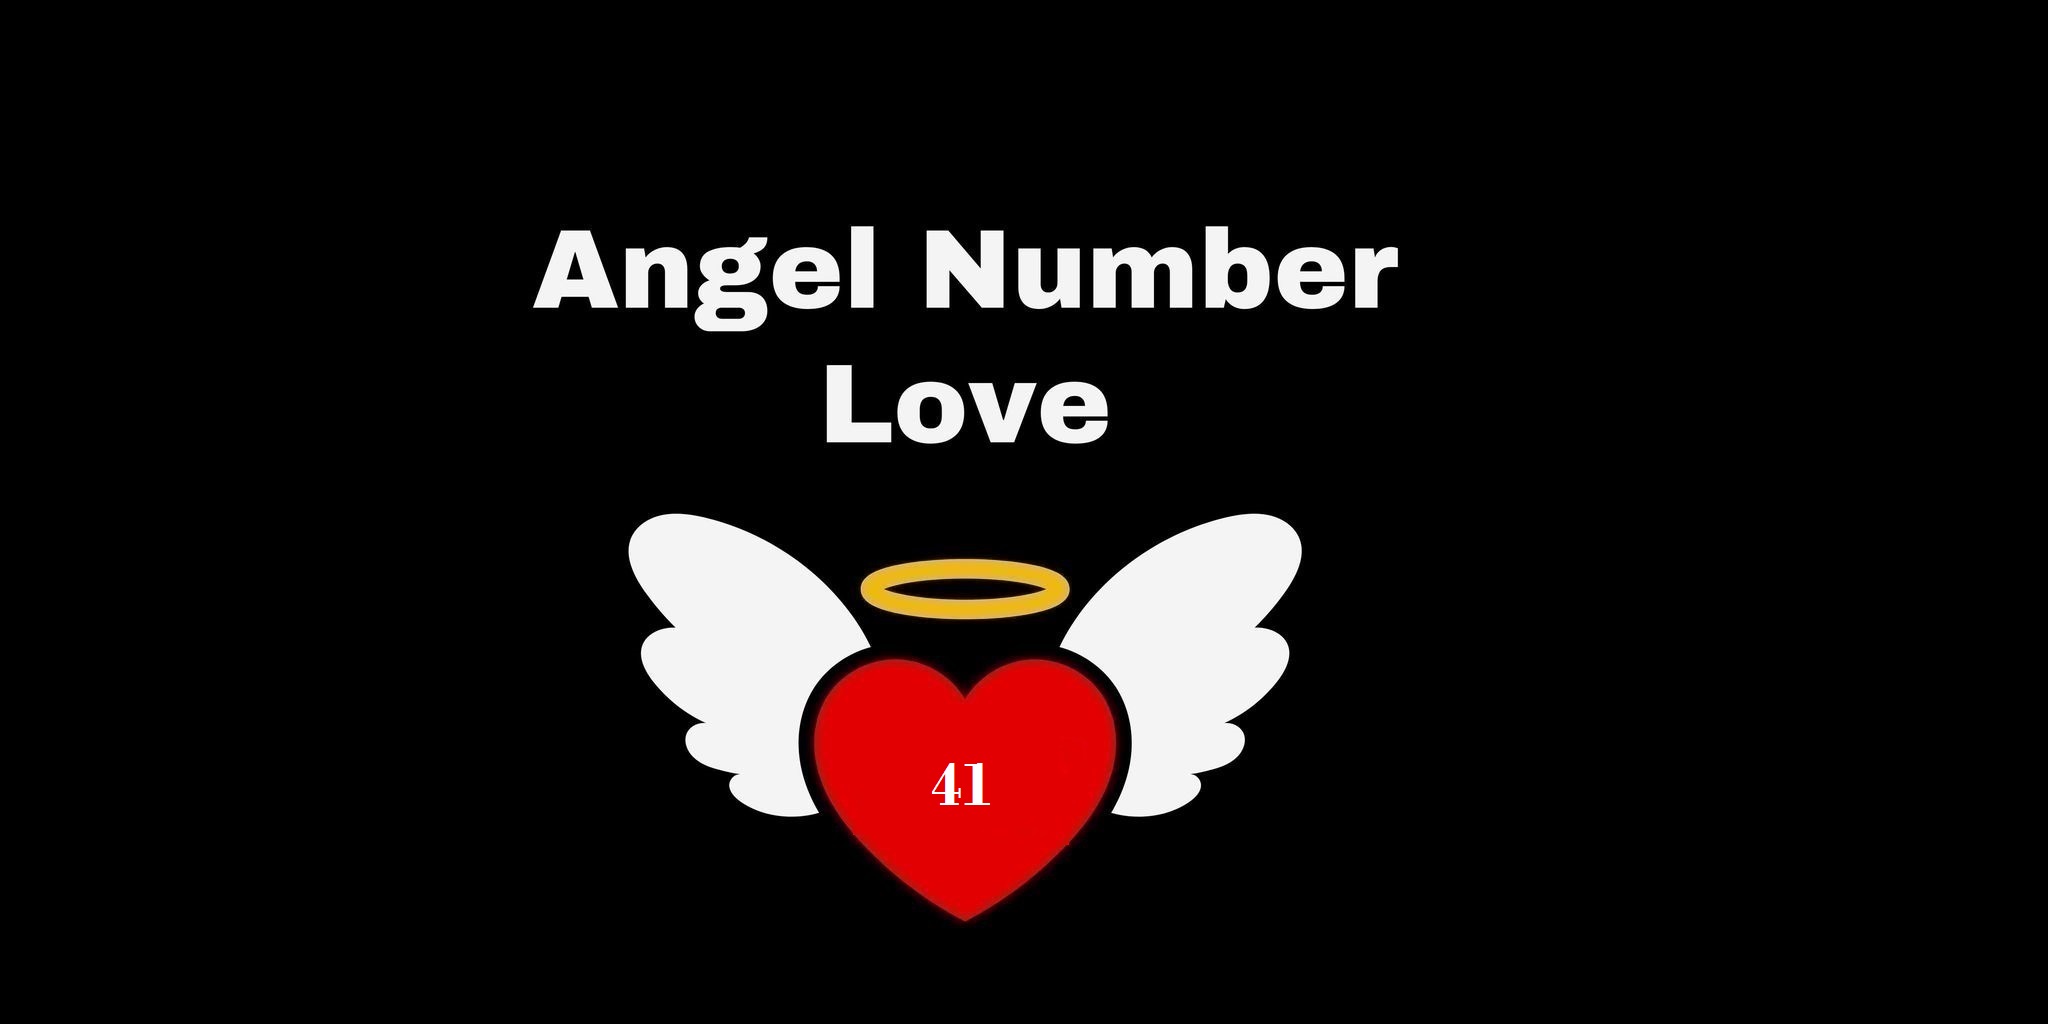 41 Angel Number Meaning In Love